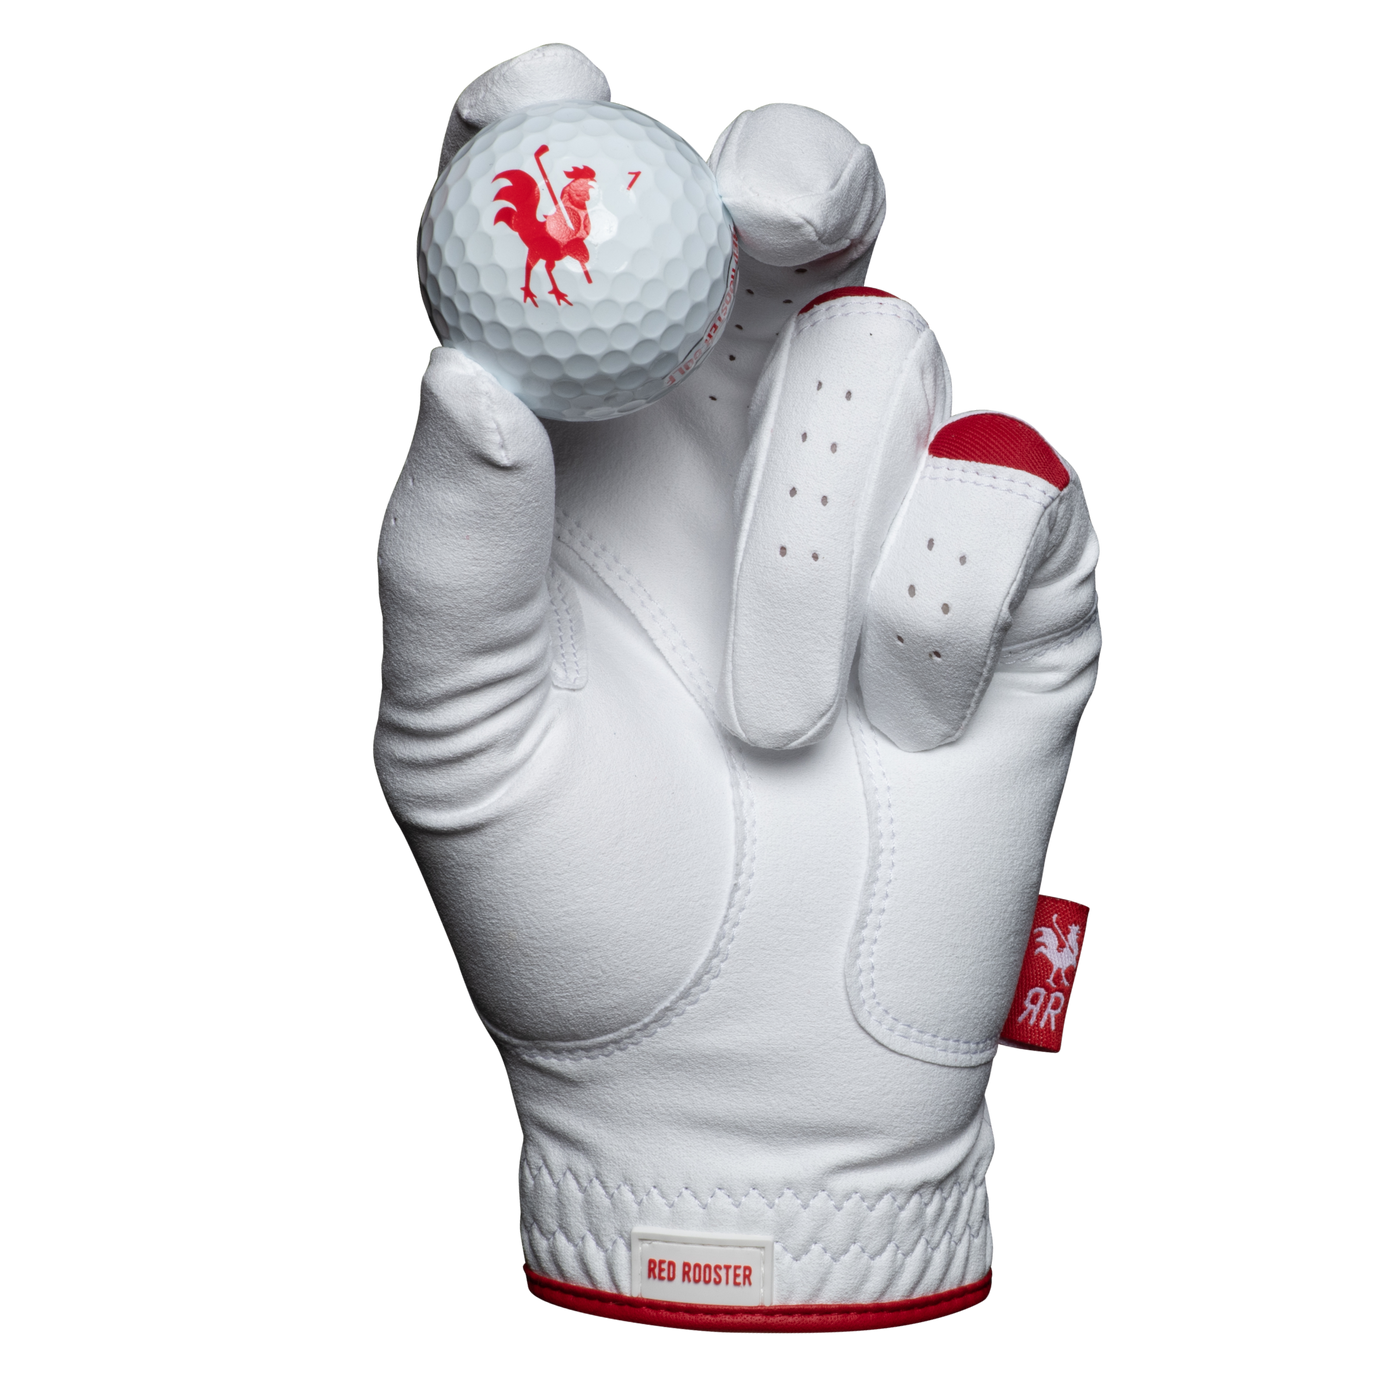 The Range Rooster golf glove  holding golf ball view